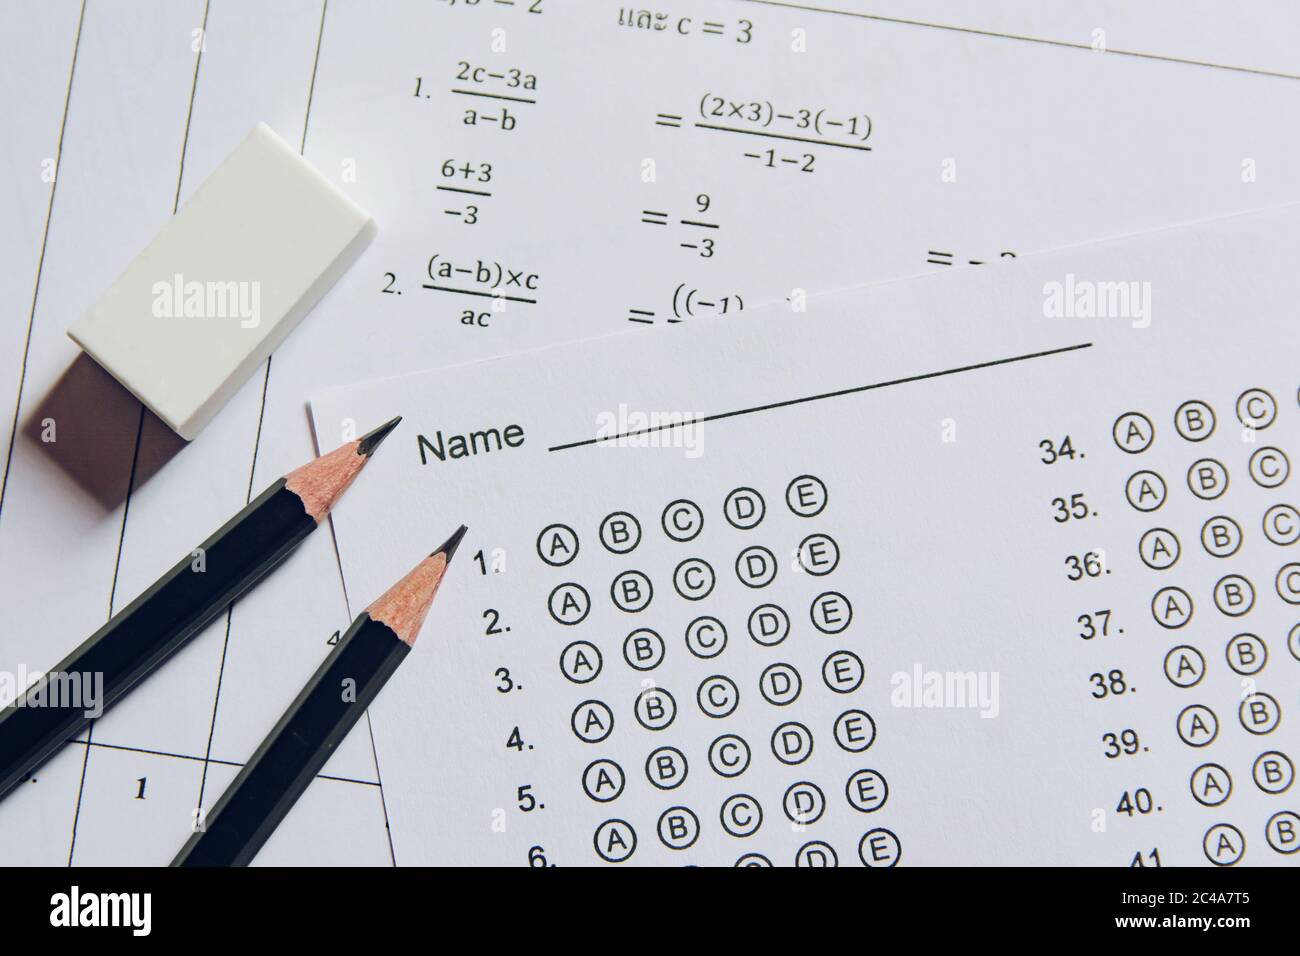 Pencil And Eraser On Answer Sheets Or Standardized Test Form With Answers Bubbled Multiple Choice Answer Sheet Stock Photo Alamy